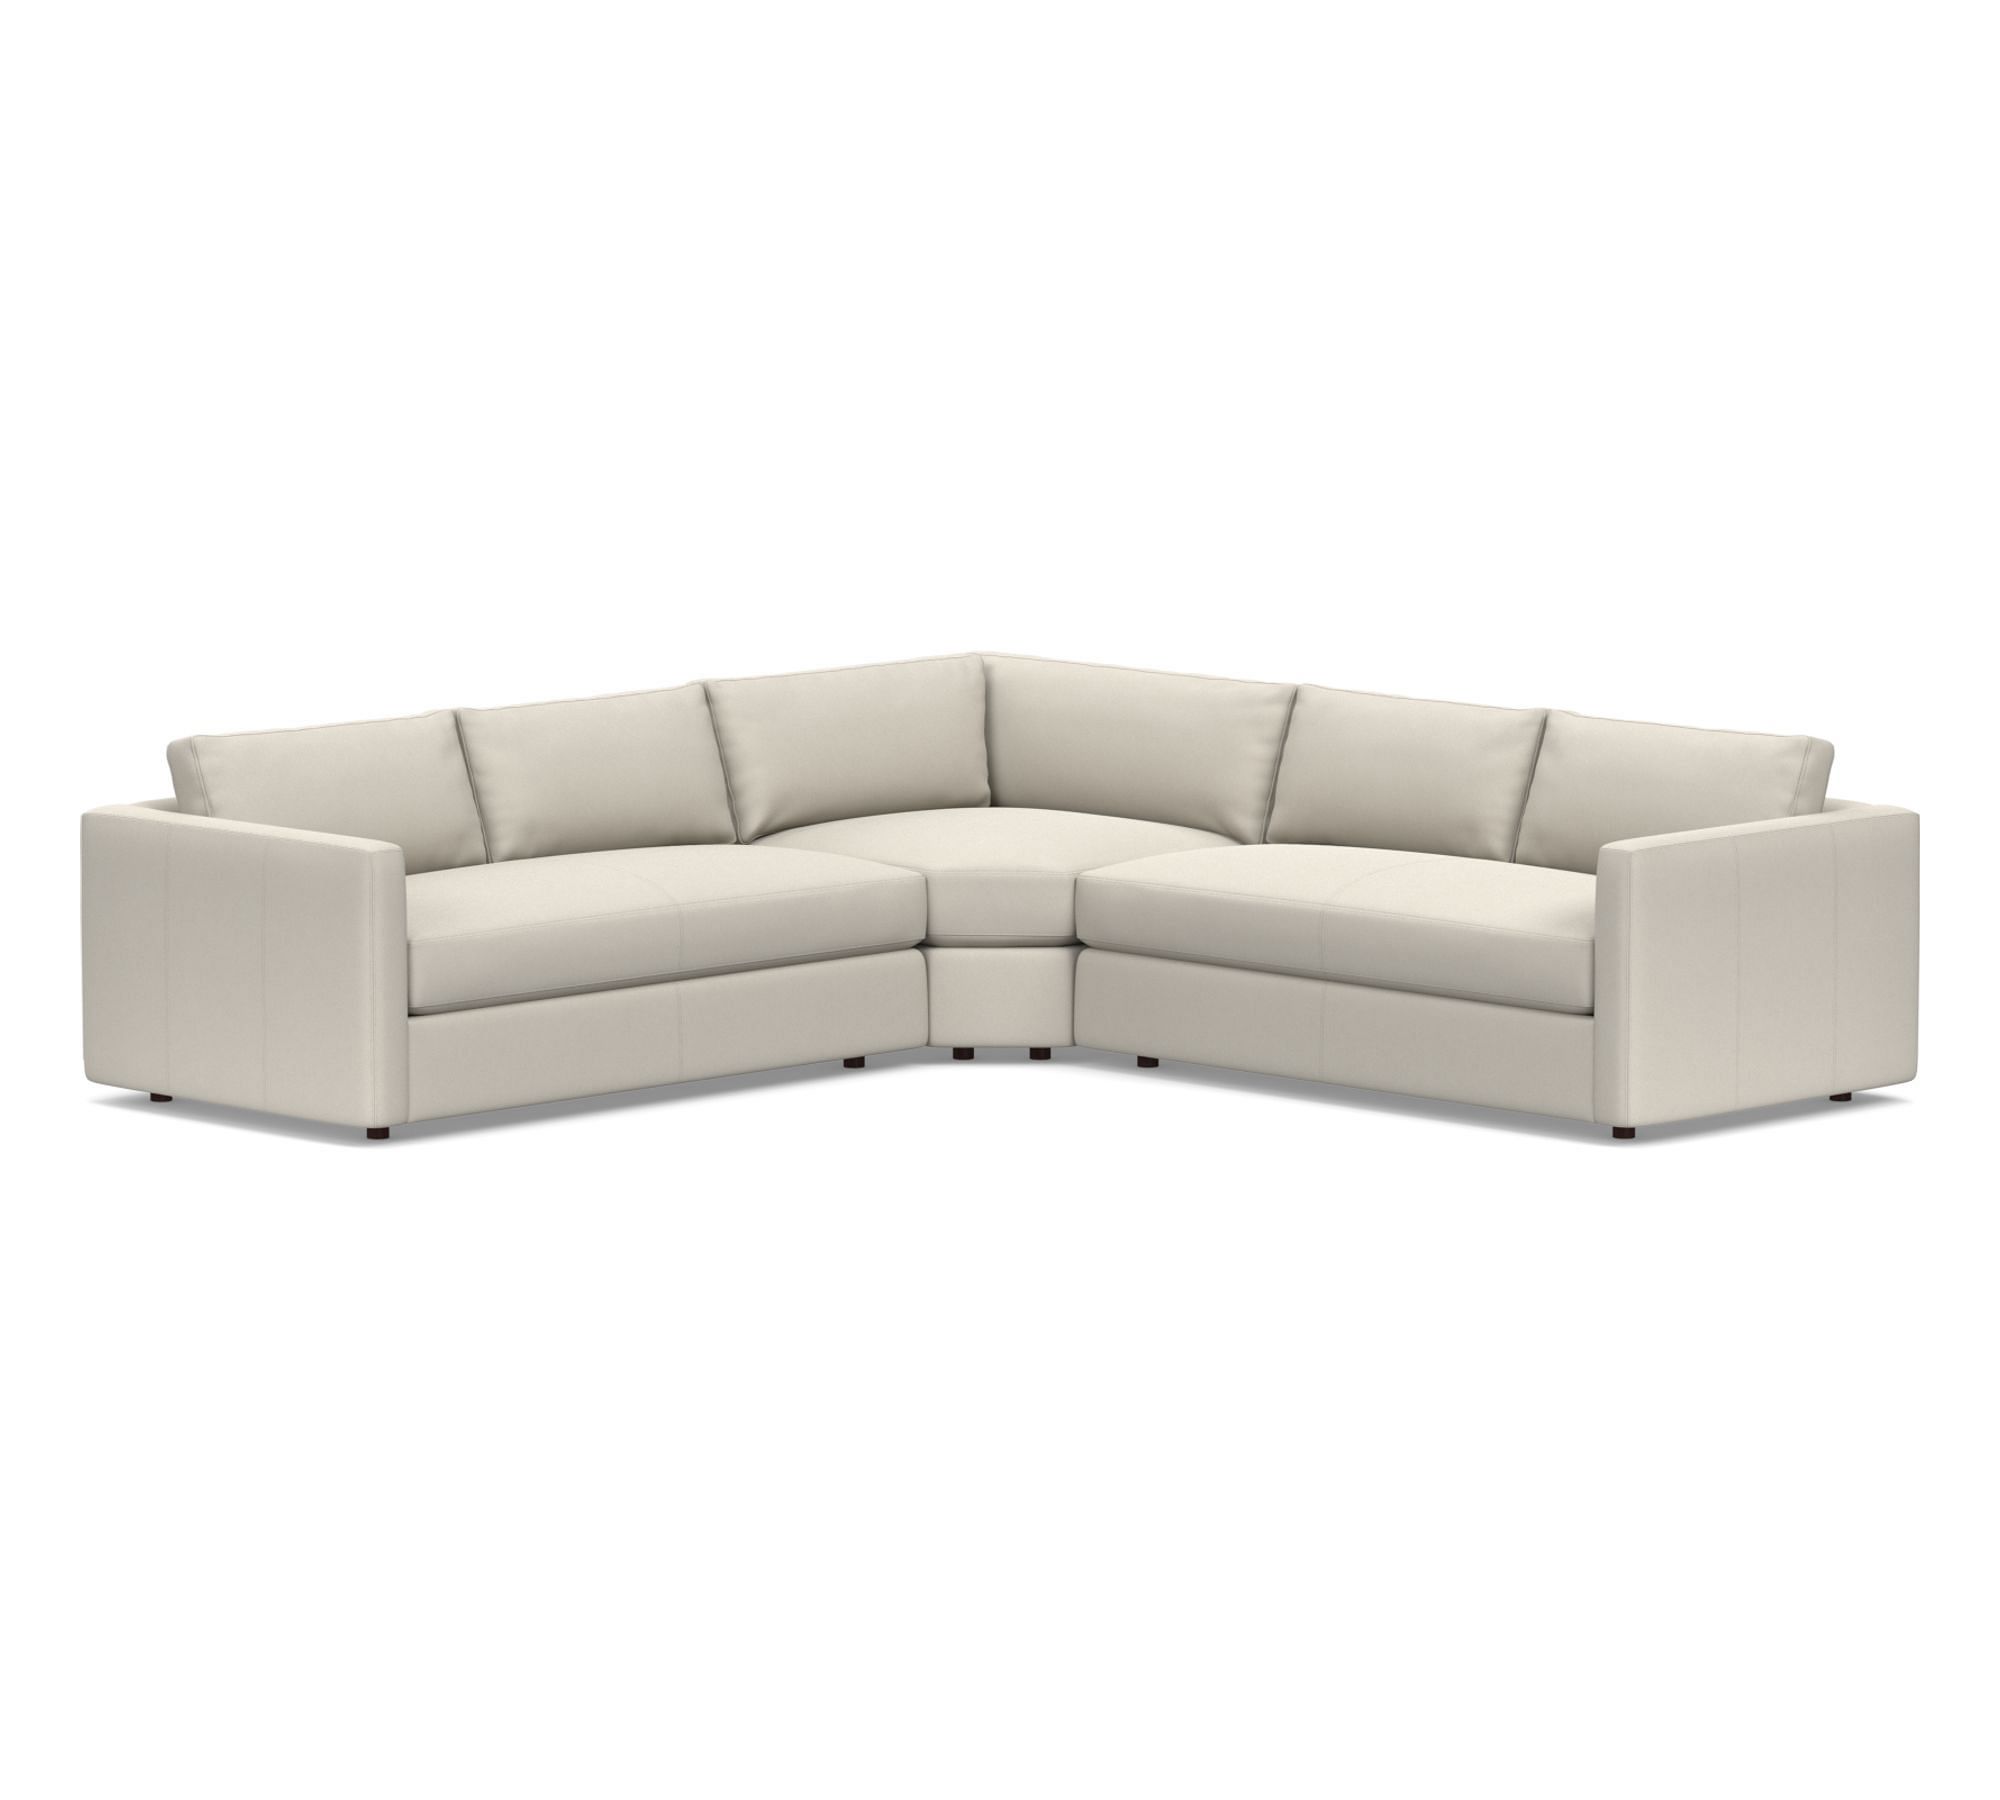 Carmel Slim Arm Leather 3-Piece L-Shaped Wedge Sectional (119")